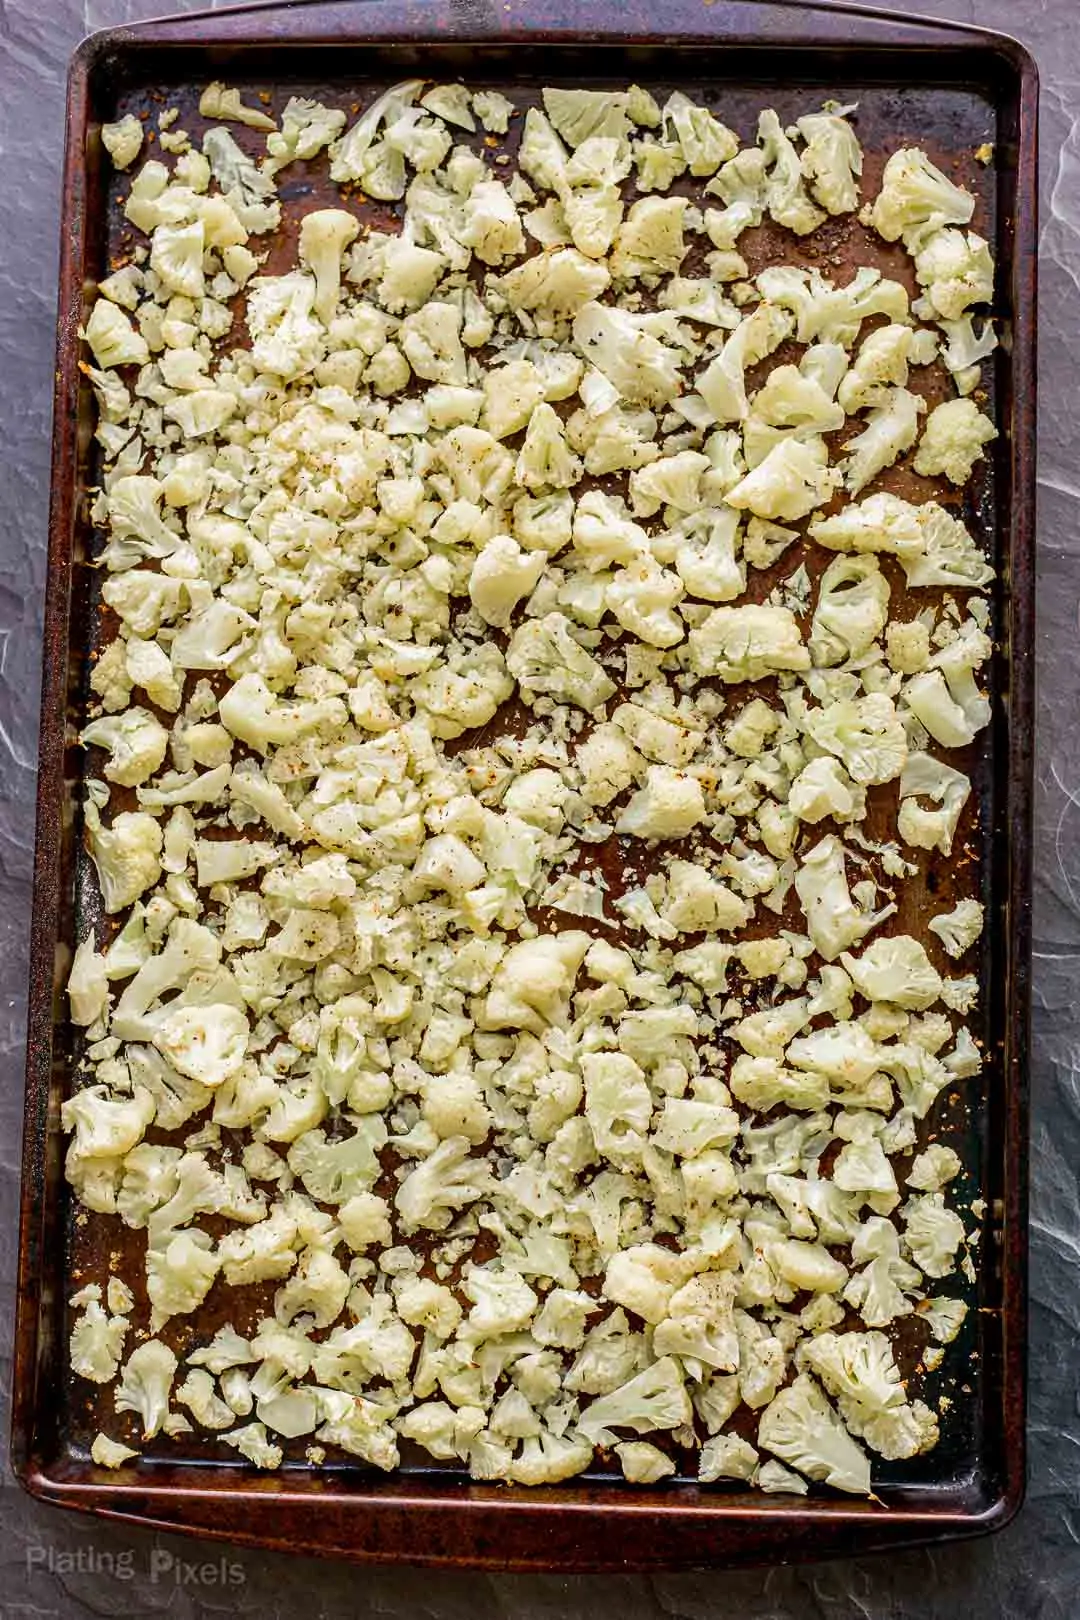 Roasted cauliflower pieces on a baking sheet